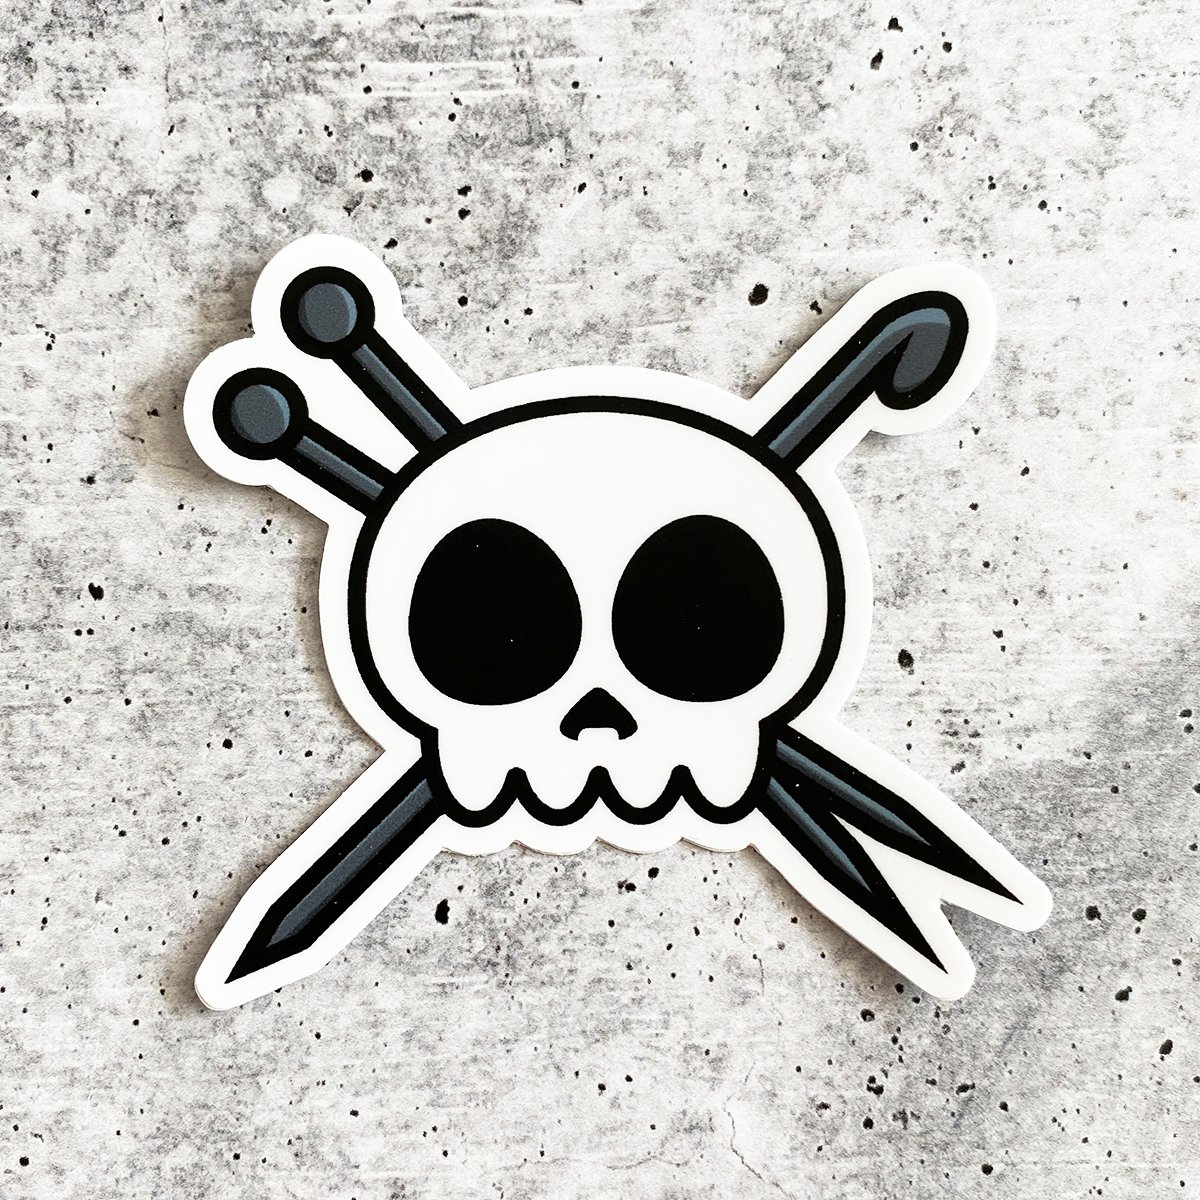 Skull and Cross Hook and Needles_square.jpg